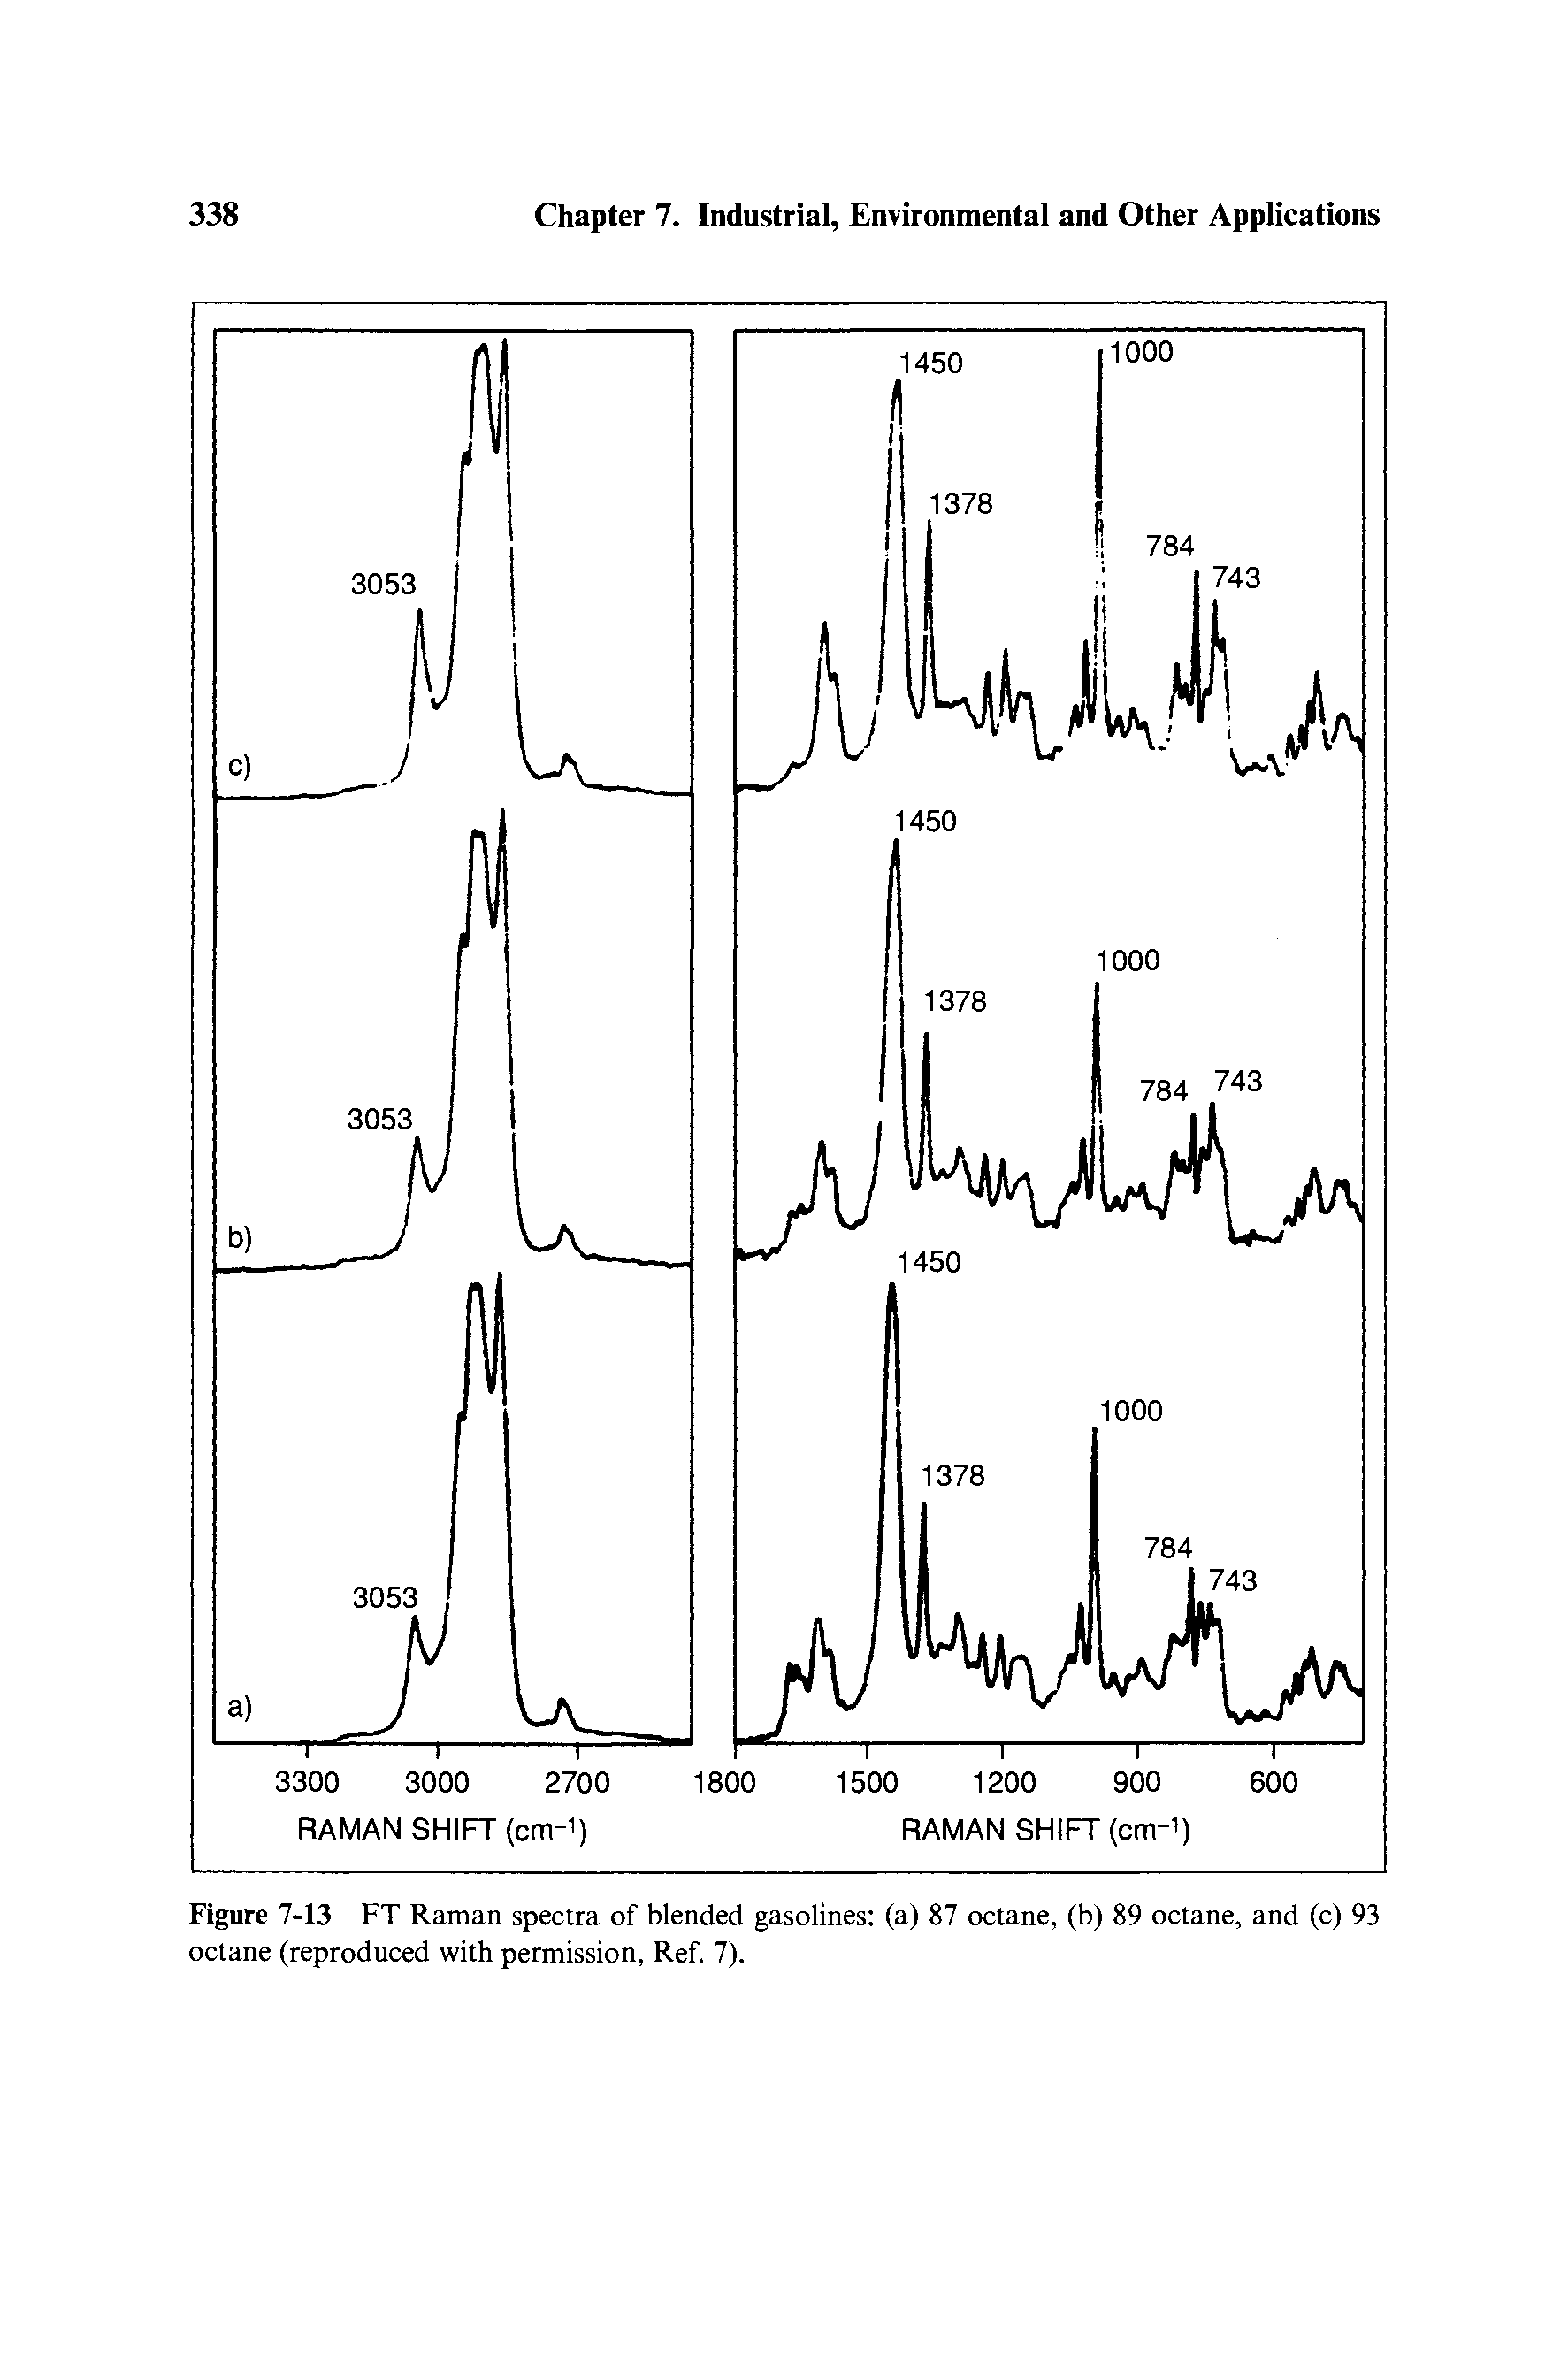 Figure 7-13 FT Raman spectra of blended gasolines (a) 87 octane, (b) 89 octane, and (c) 93 octane (reproduced with permission, Ref. 7).